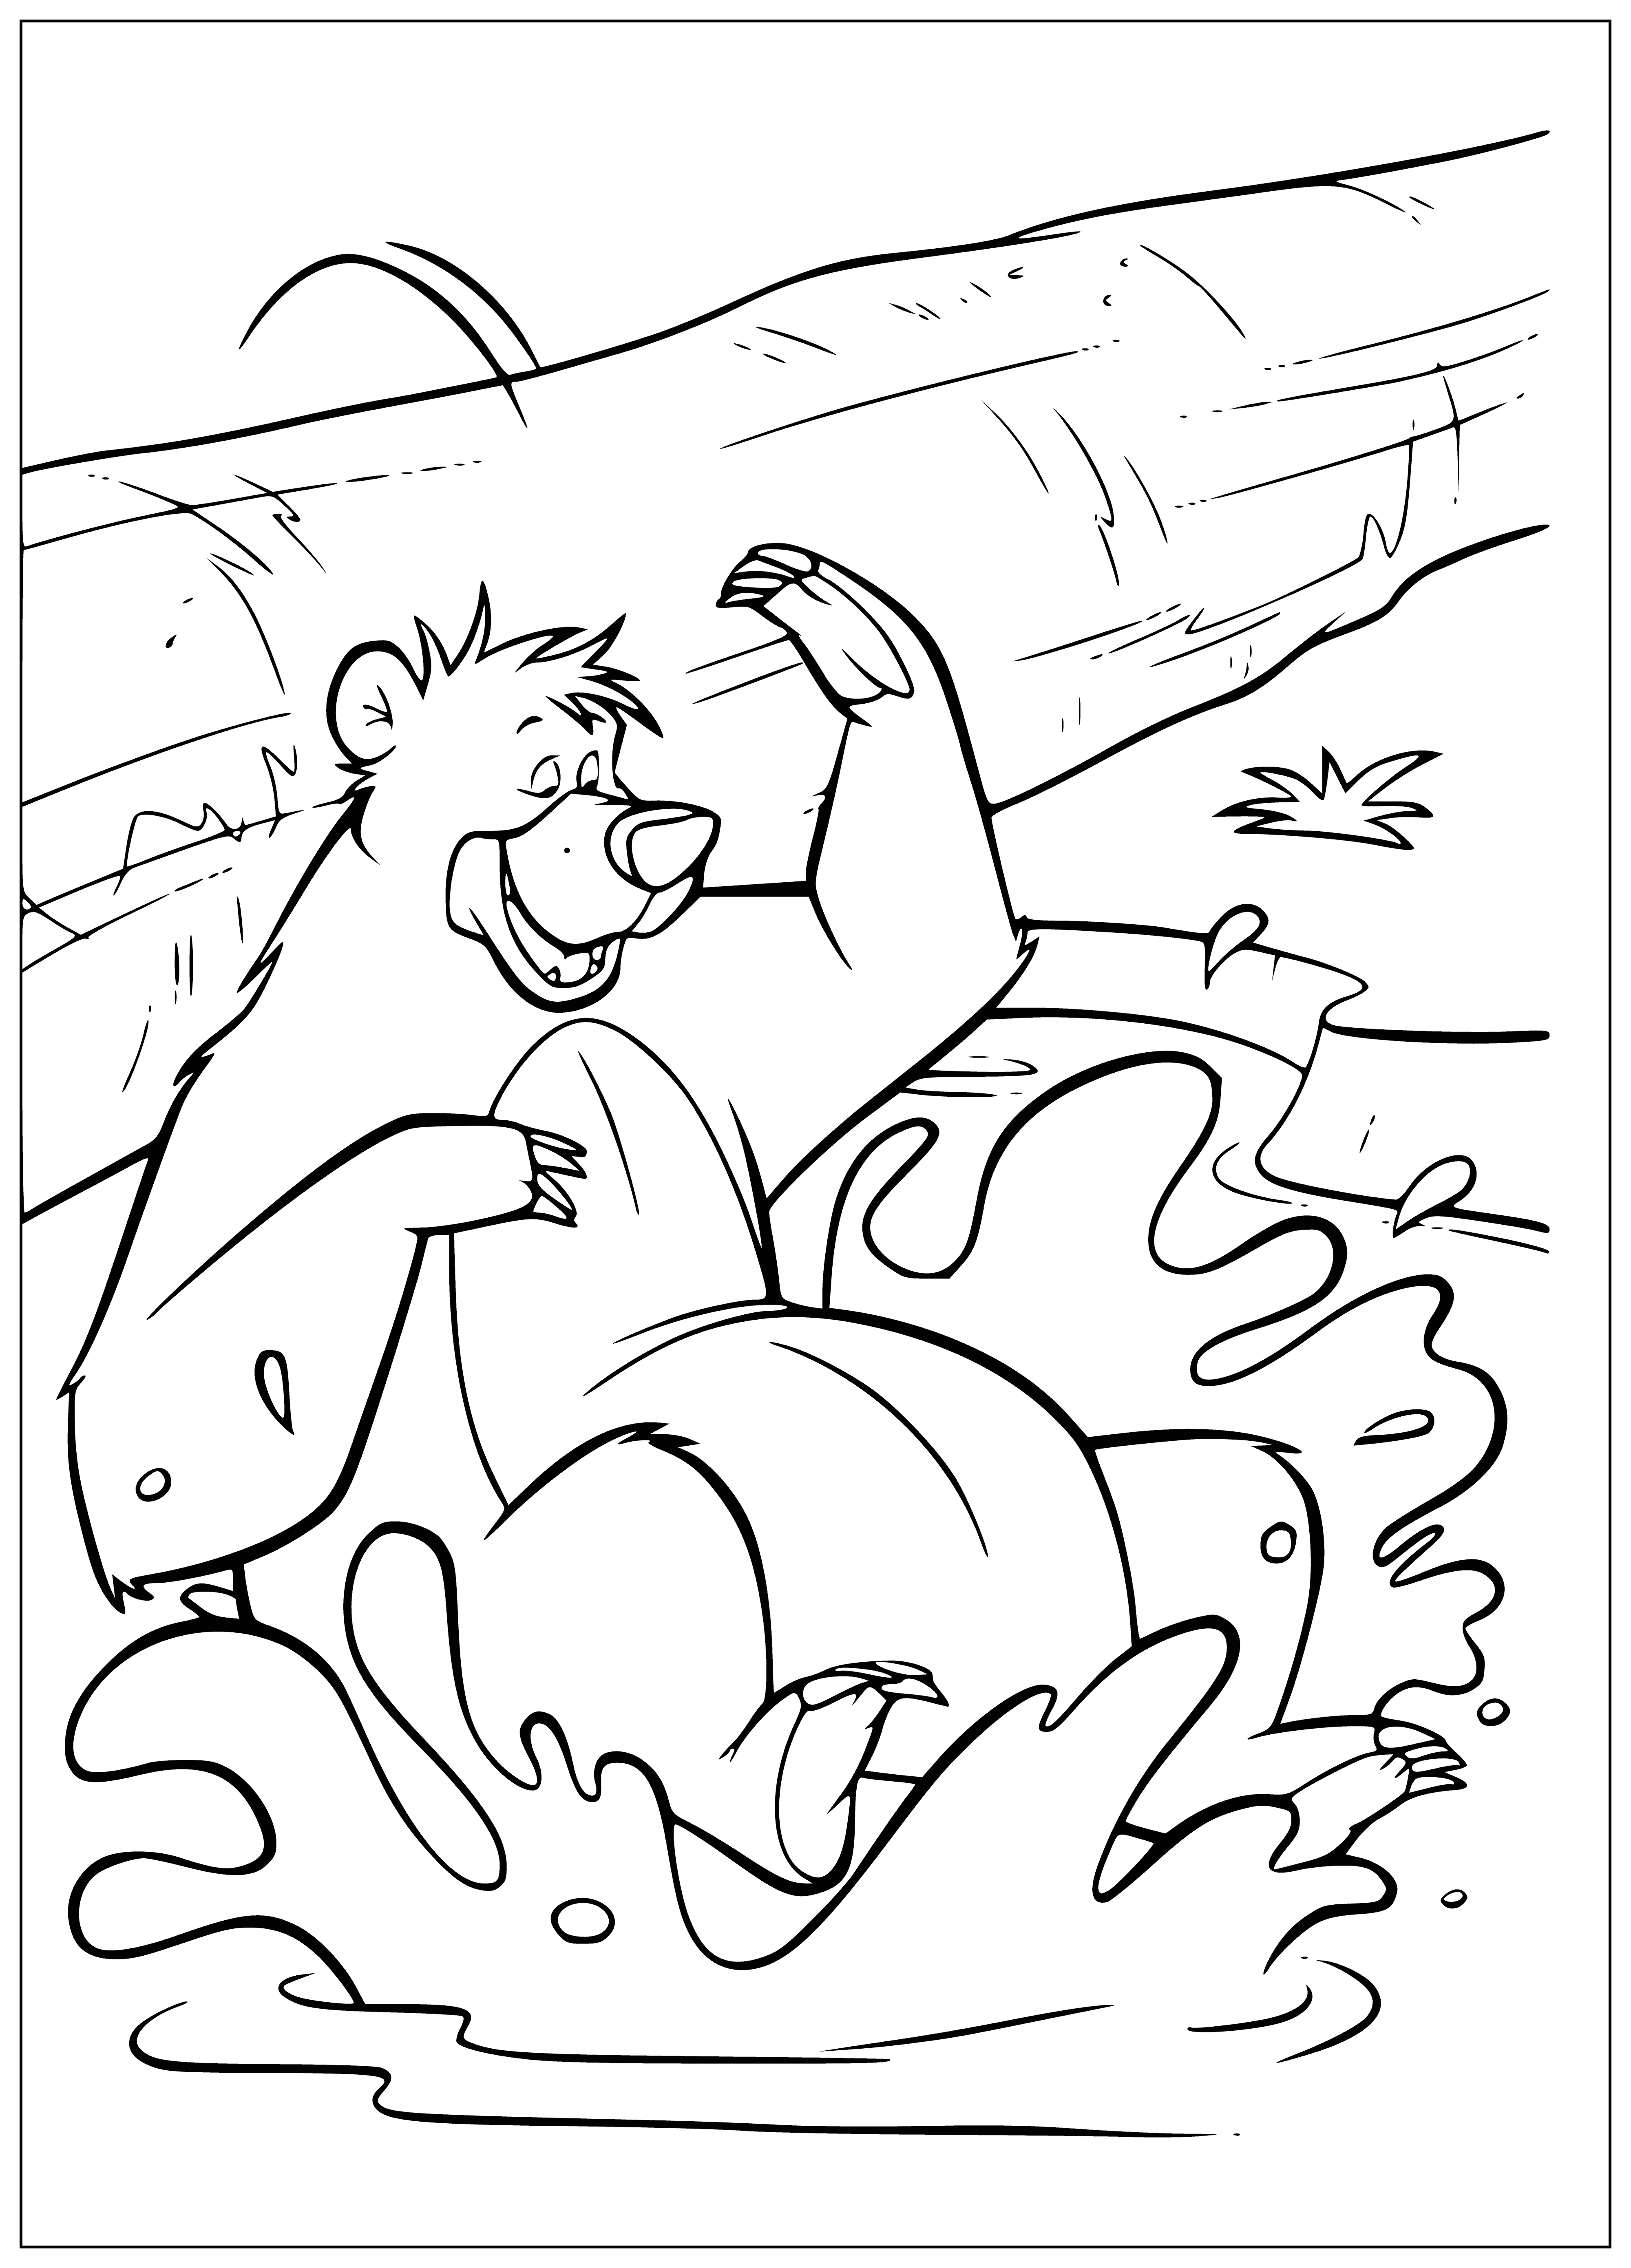 coloring page: Peaceful Baloo Bear is lounging in a green meadow, with a large head, thick fur, and round belly. Content at peace with himself.